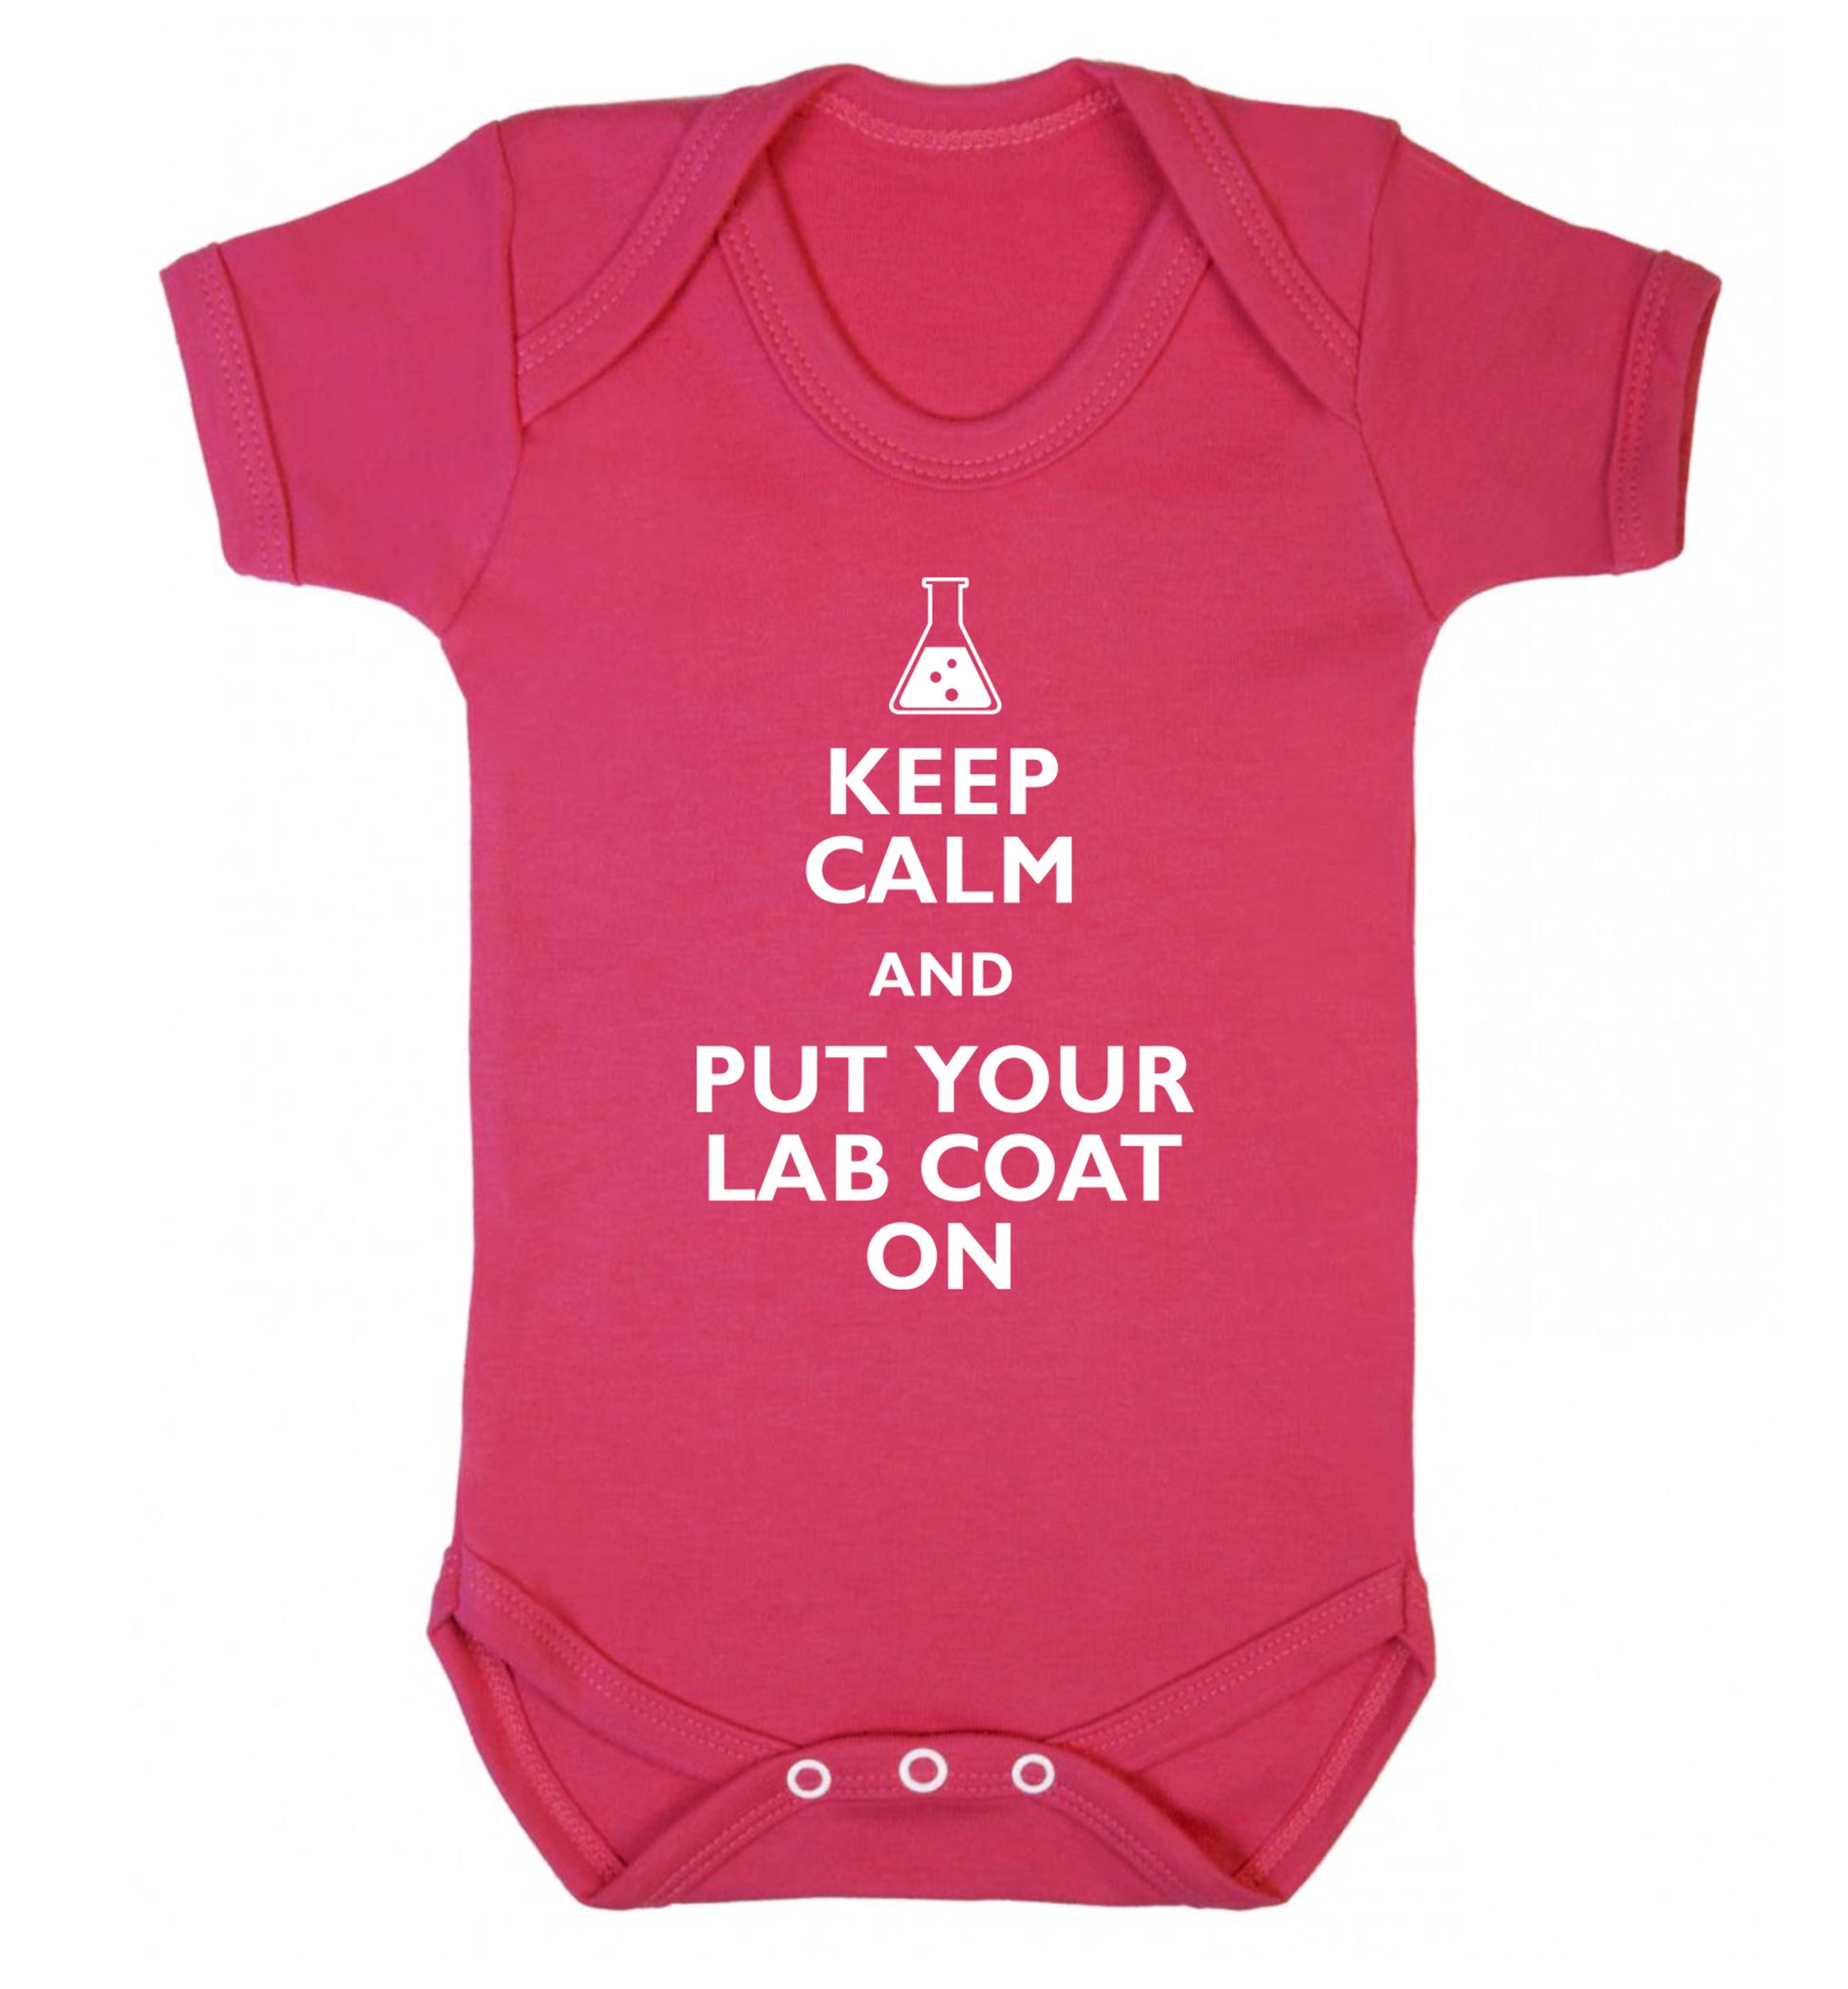 Keep calm and put your lab coat on Baby Vest dark pink 18-24 months